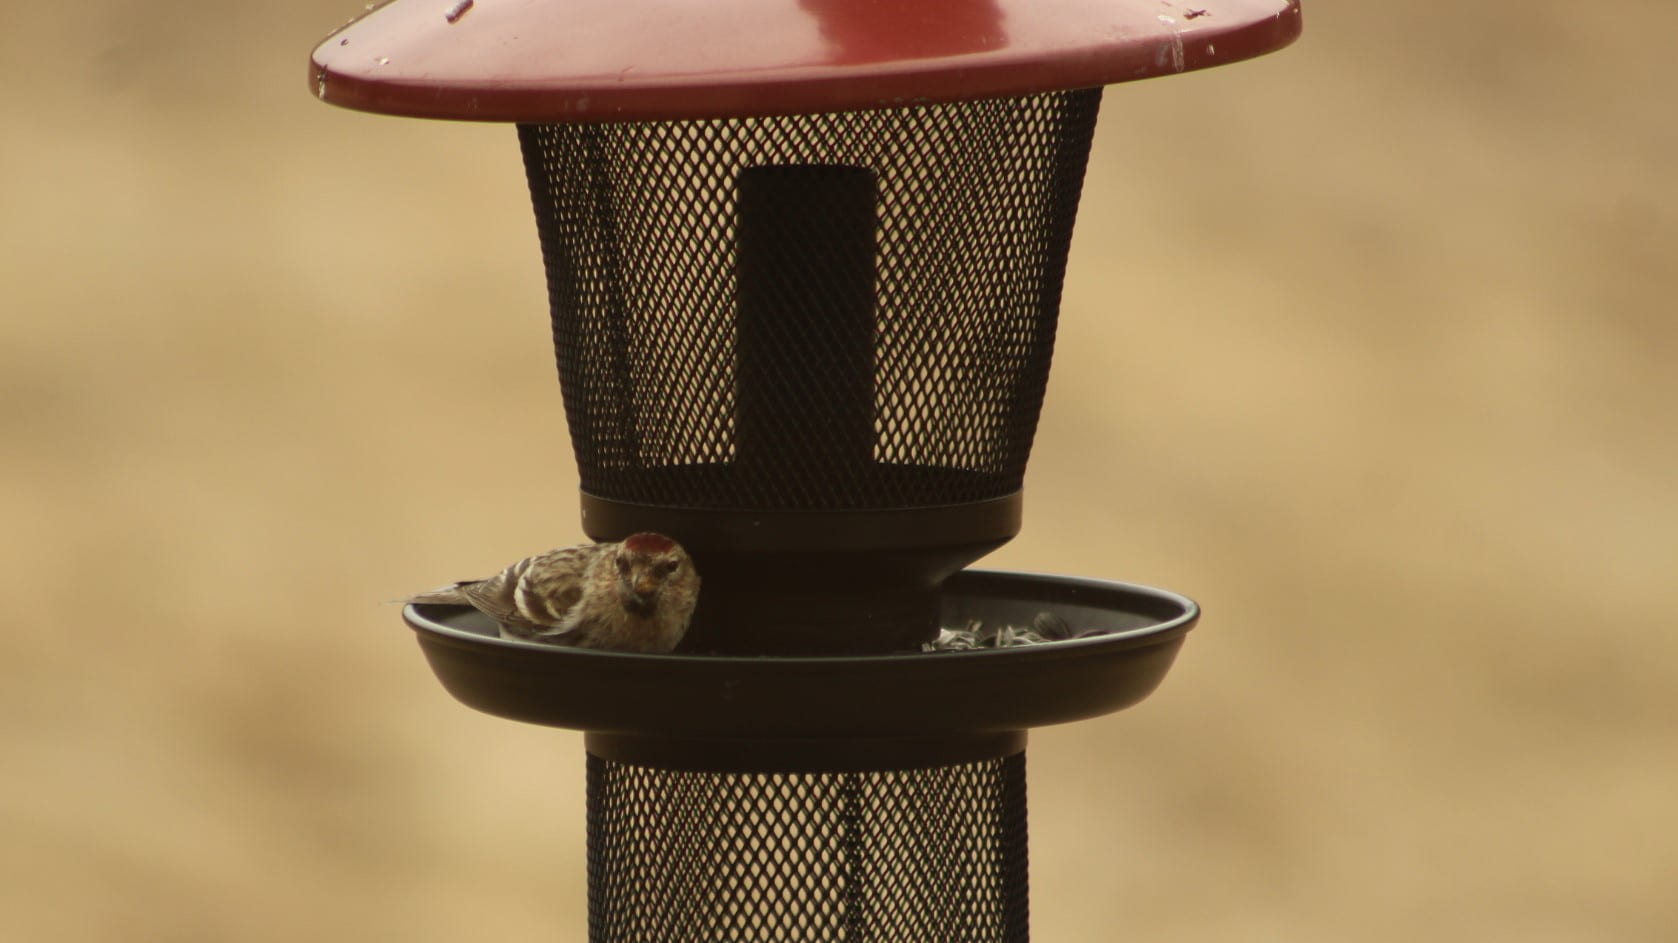 photo of mottle brown bird with a red cap sitting on a black screened bird feeder with a red top